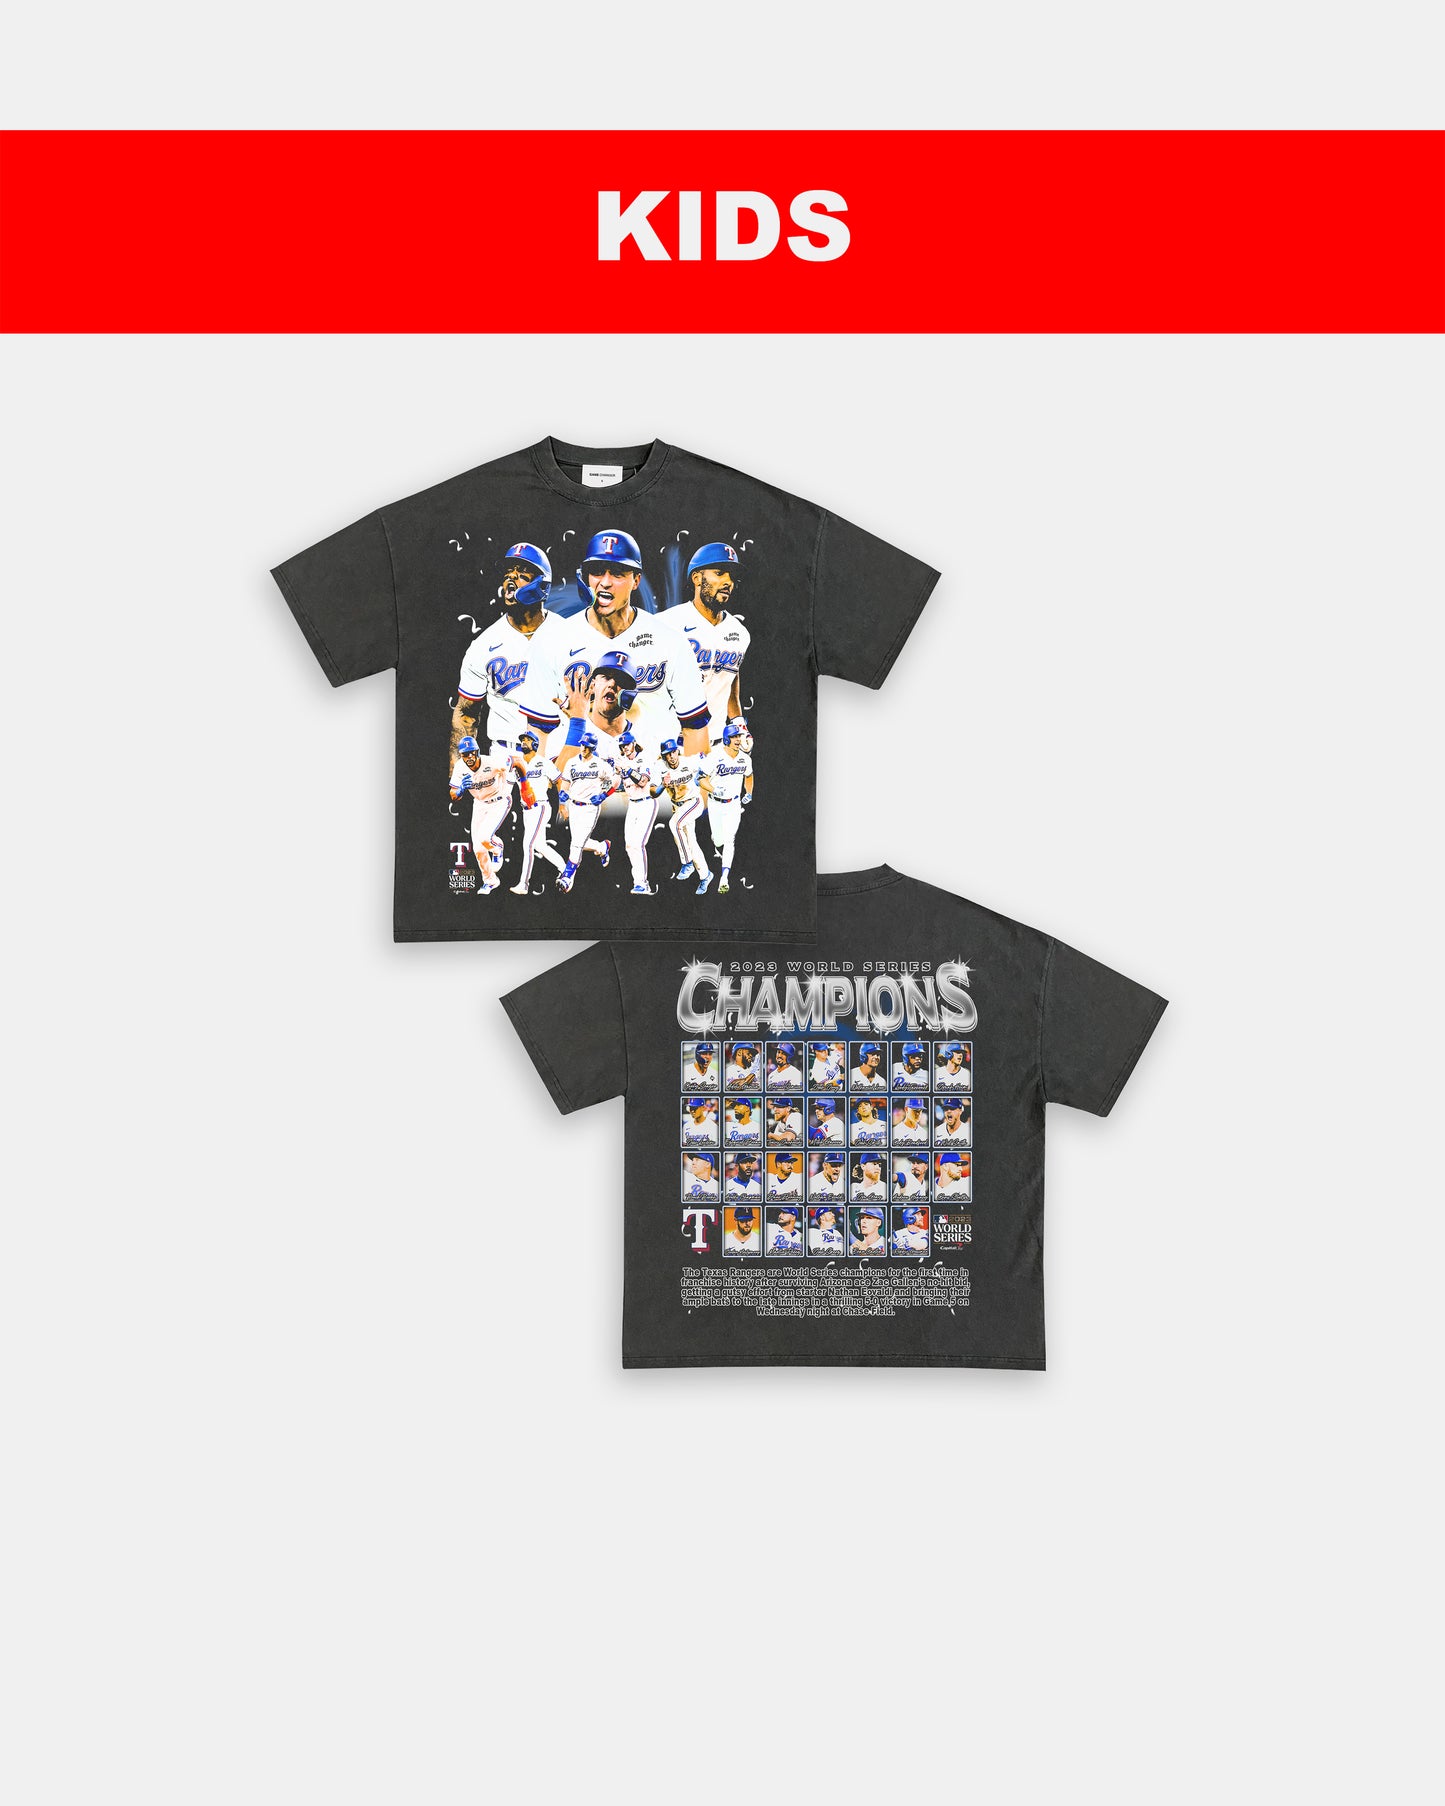 2023 WORLD SERIES CHAMPS - KIDS TEE - [DS]